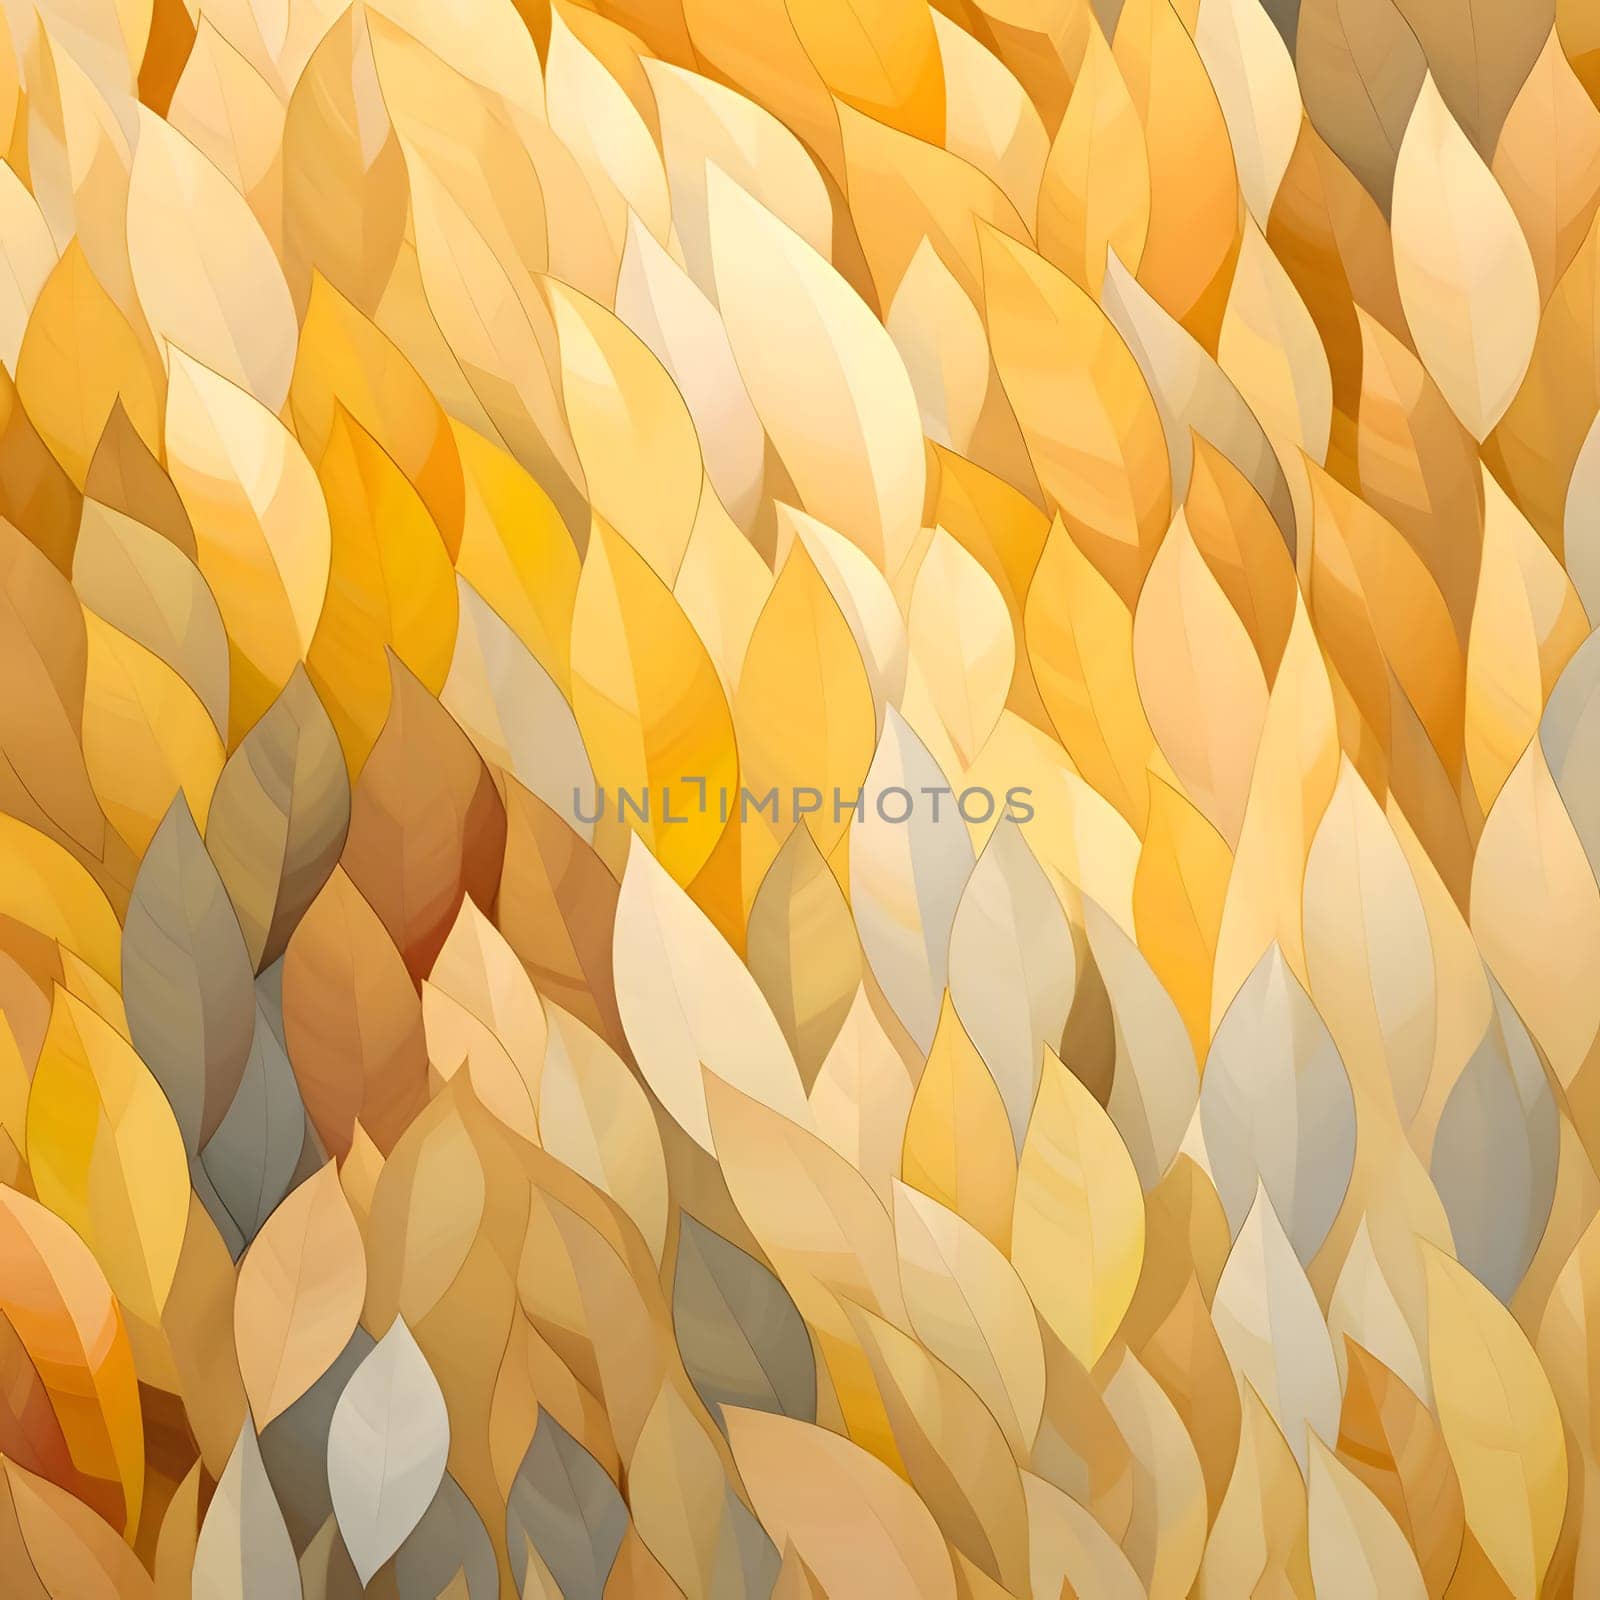 Patterns and banners backgrounds: Seamless background pattern. Abstract yellow and brown leaves pattern.